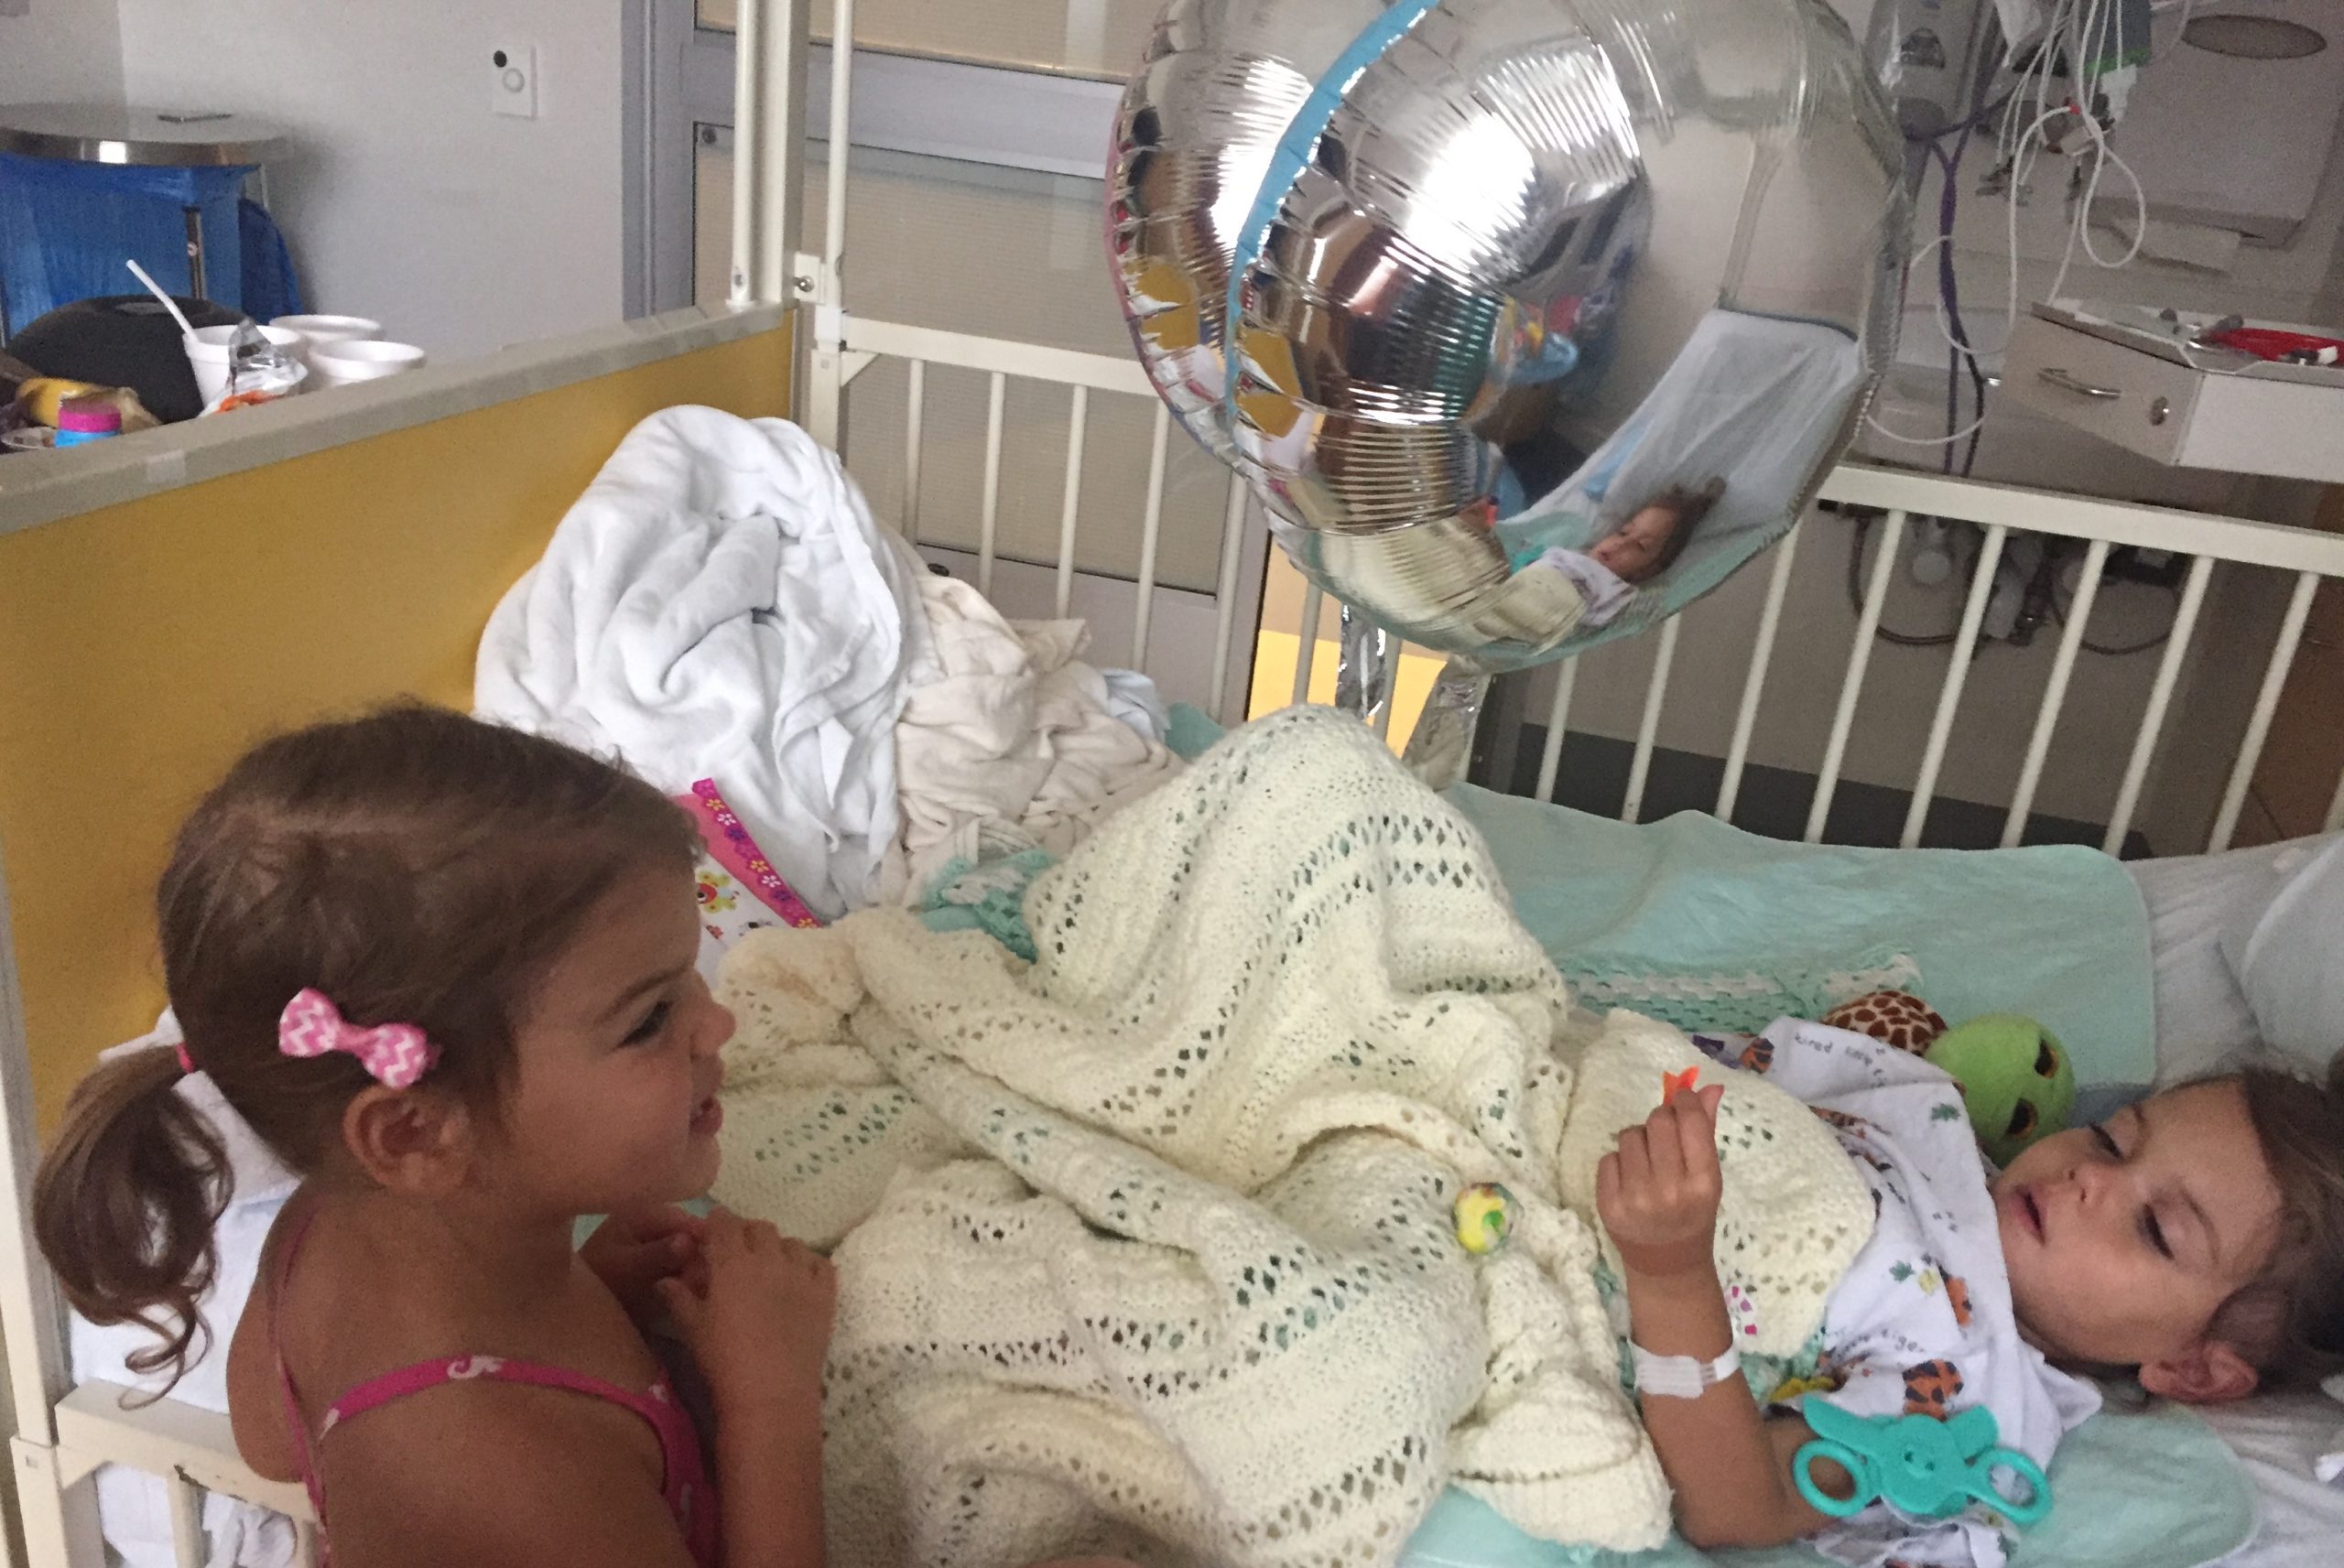 A young girl with pigtails and a ribbon in her hair visits another young girl in a hospital bed.